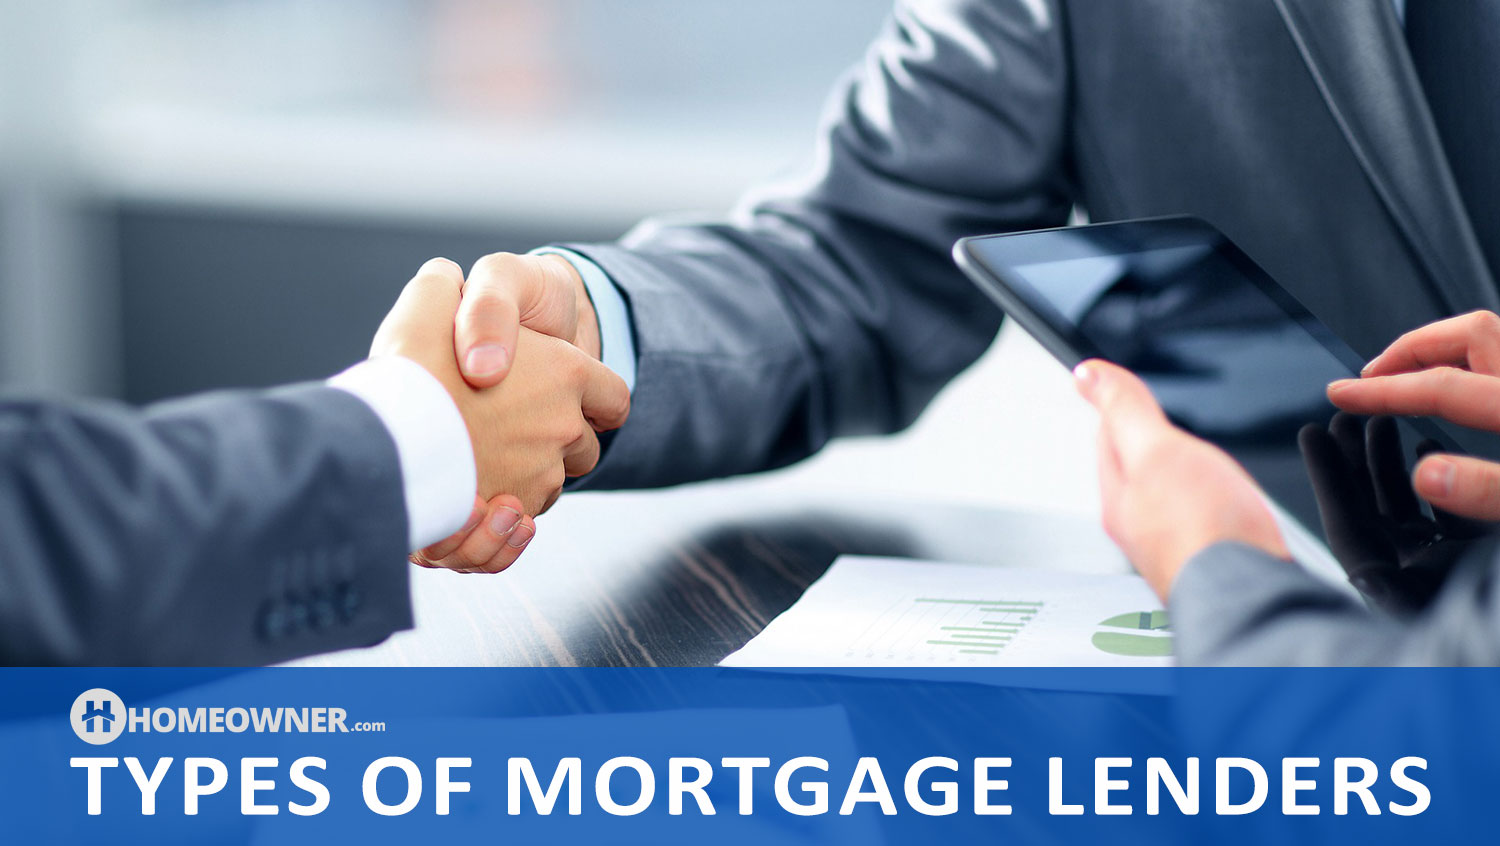 9 Types of Mortgage Lenders